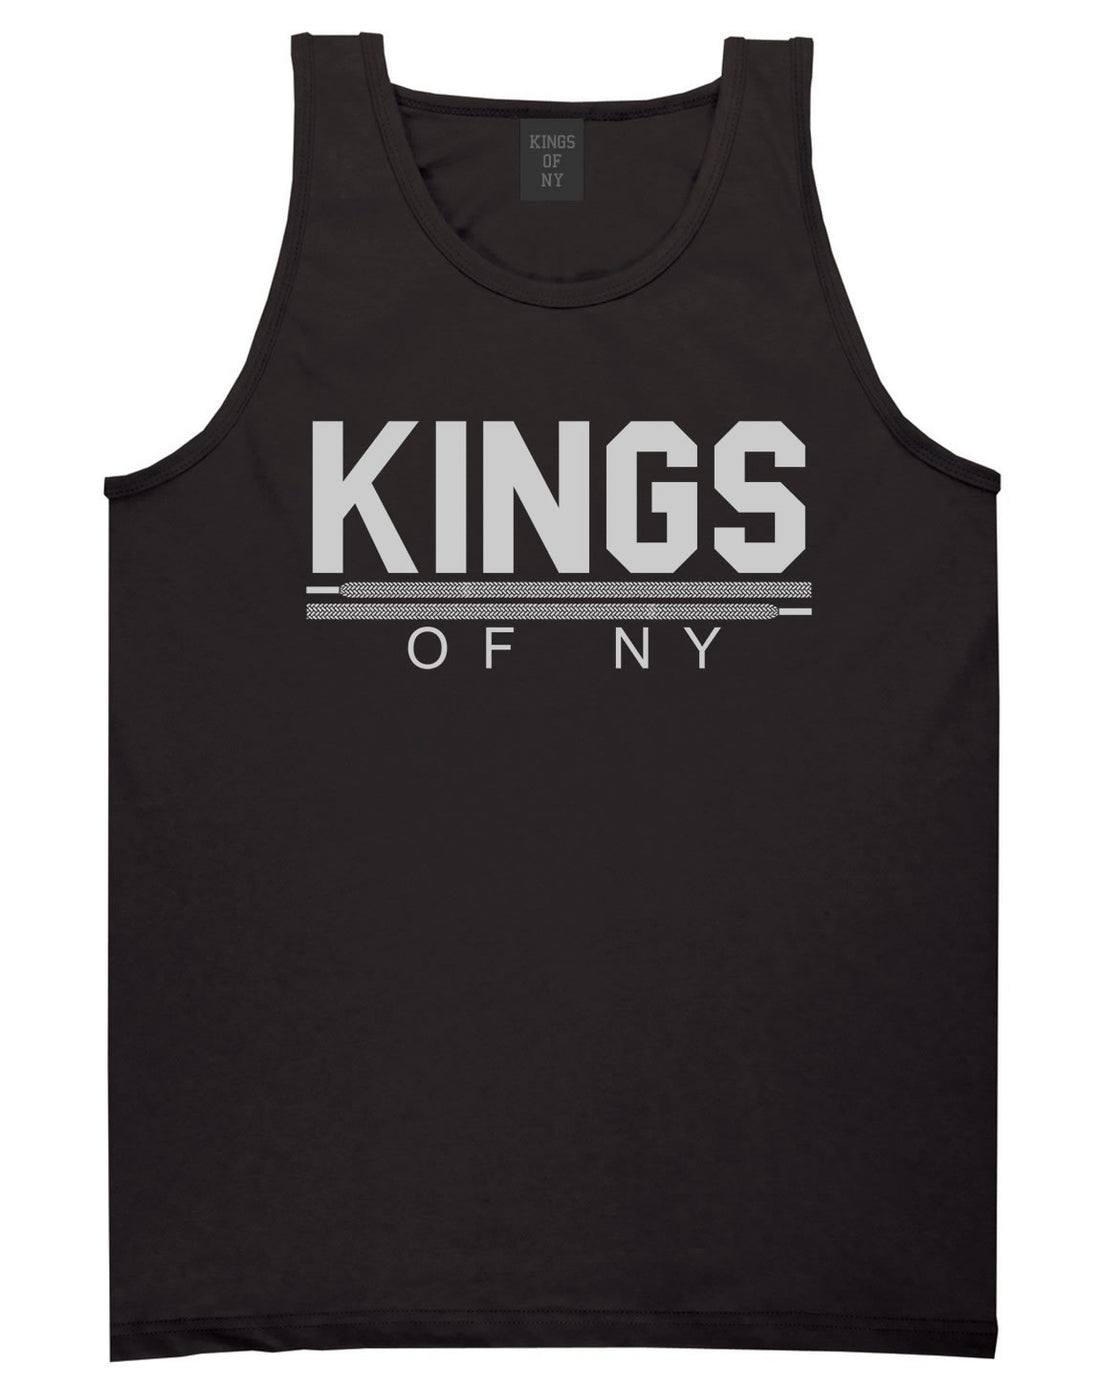 Kings Of NY Laces Tank Top in Black By Kings Of NY